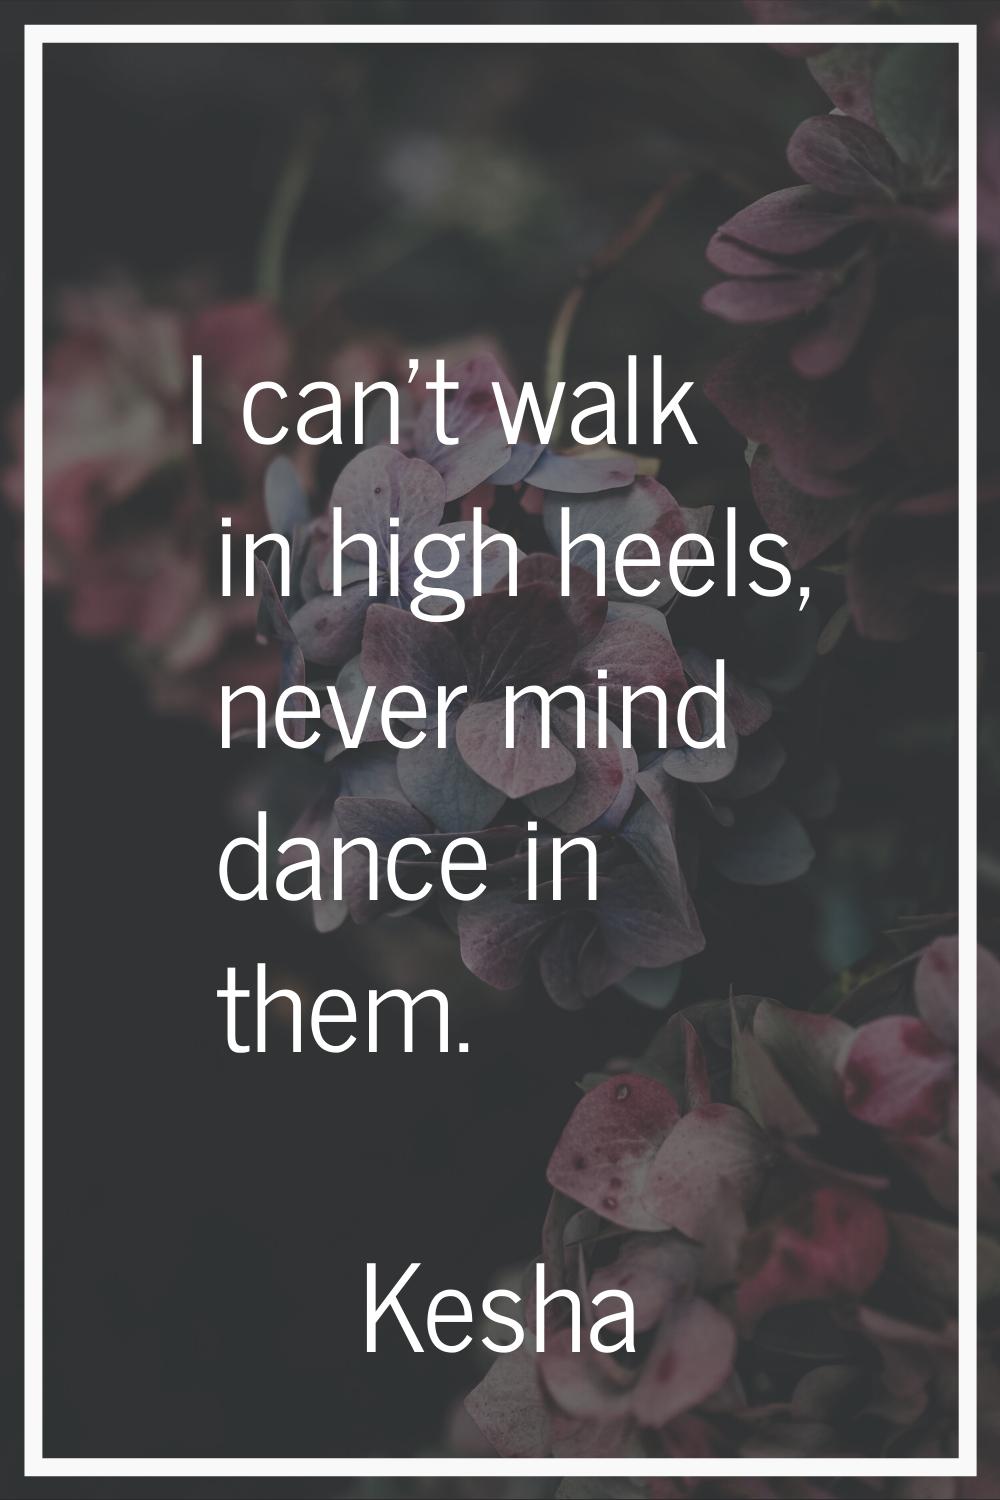 I can't walk in high heels, never mind dance in them.